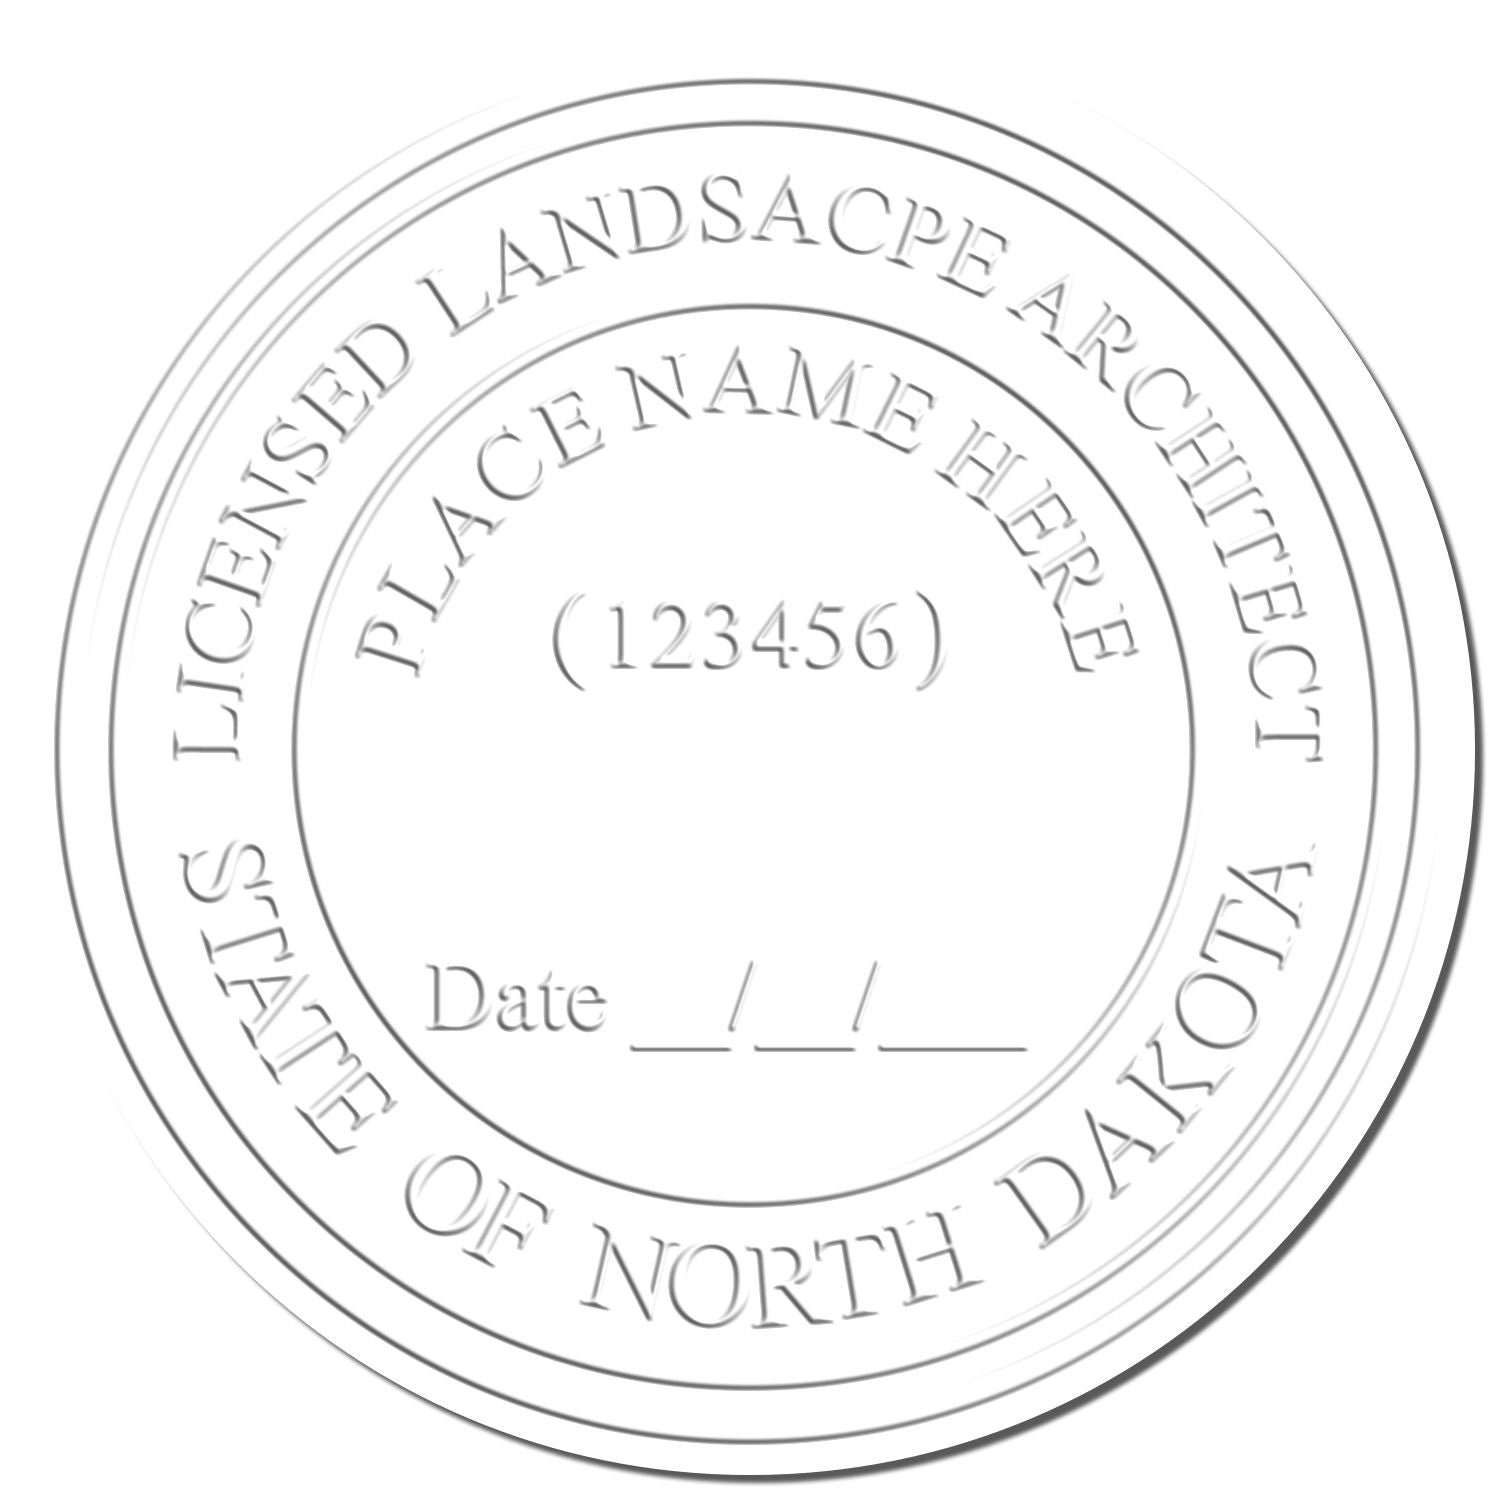 This paper is stamped with a sample imprint of the North Dakota Long Reach Landscape Architect Embossing Stamp, signifying its quality and reliability.